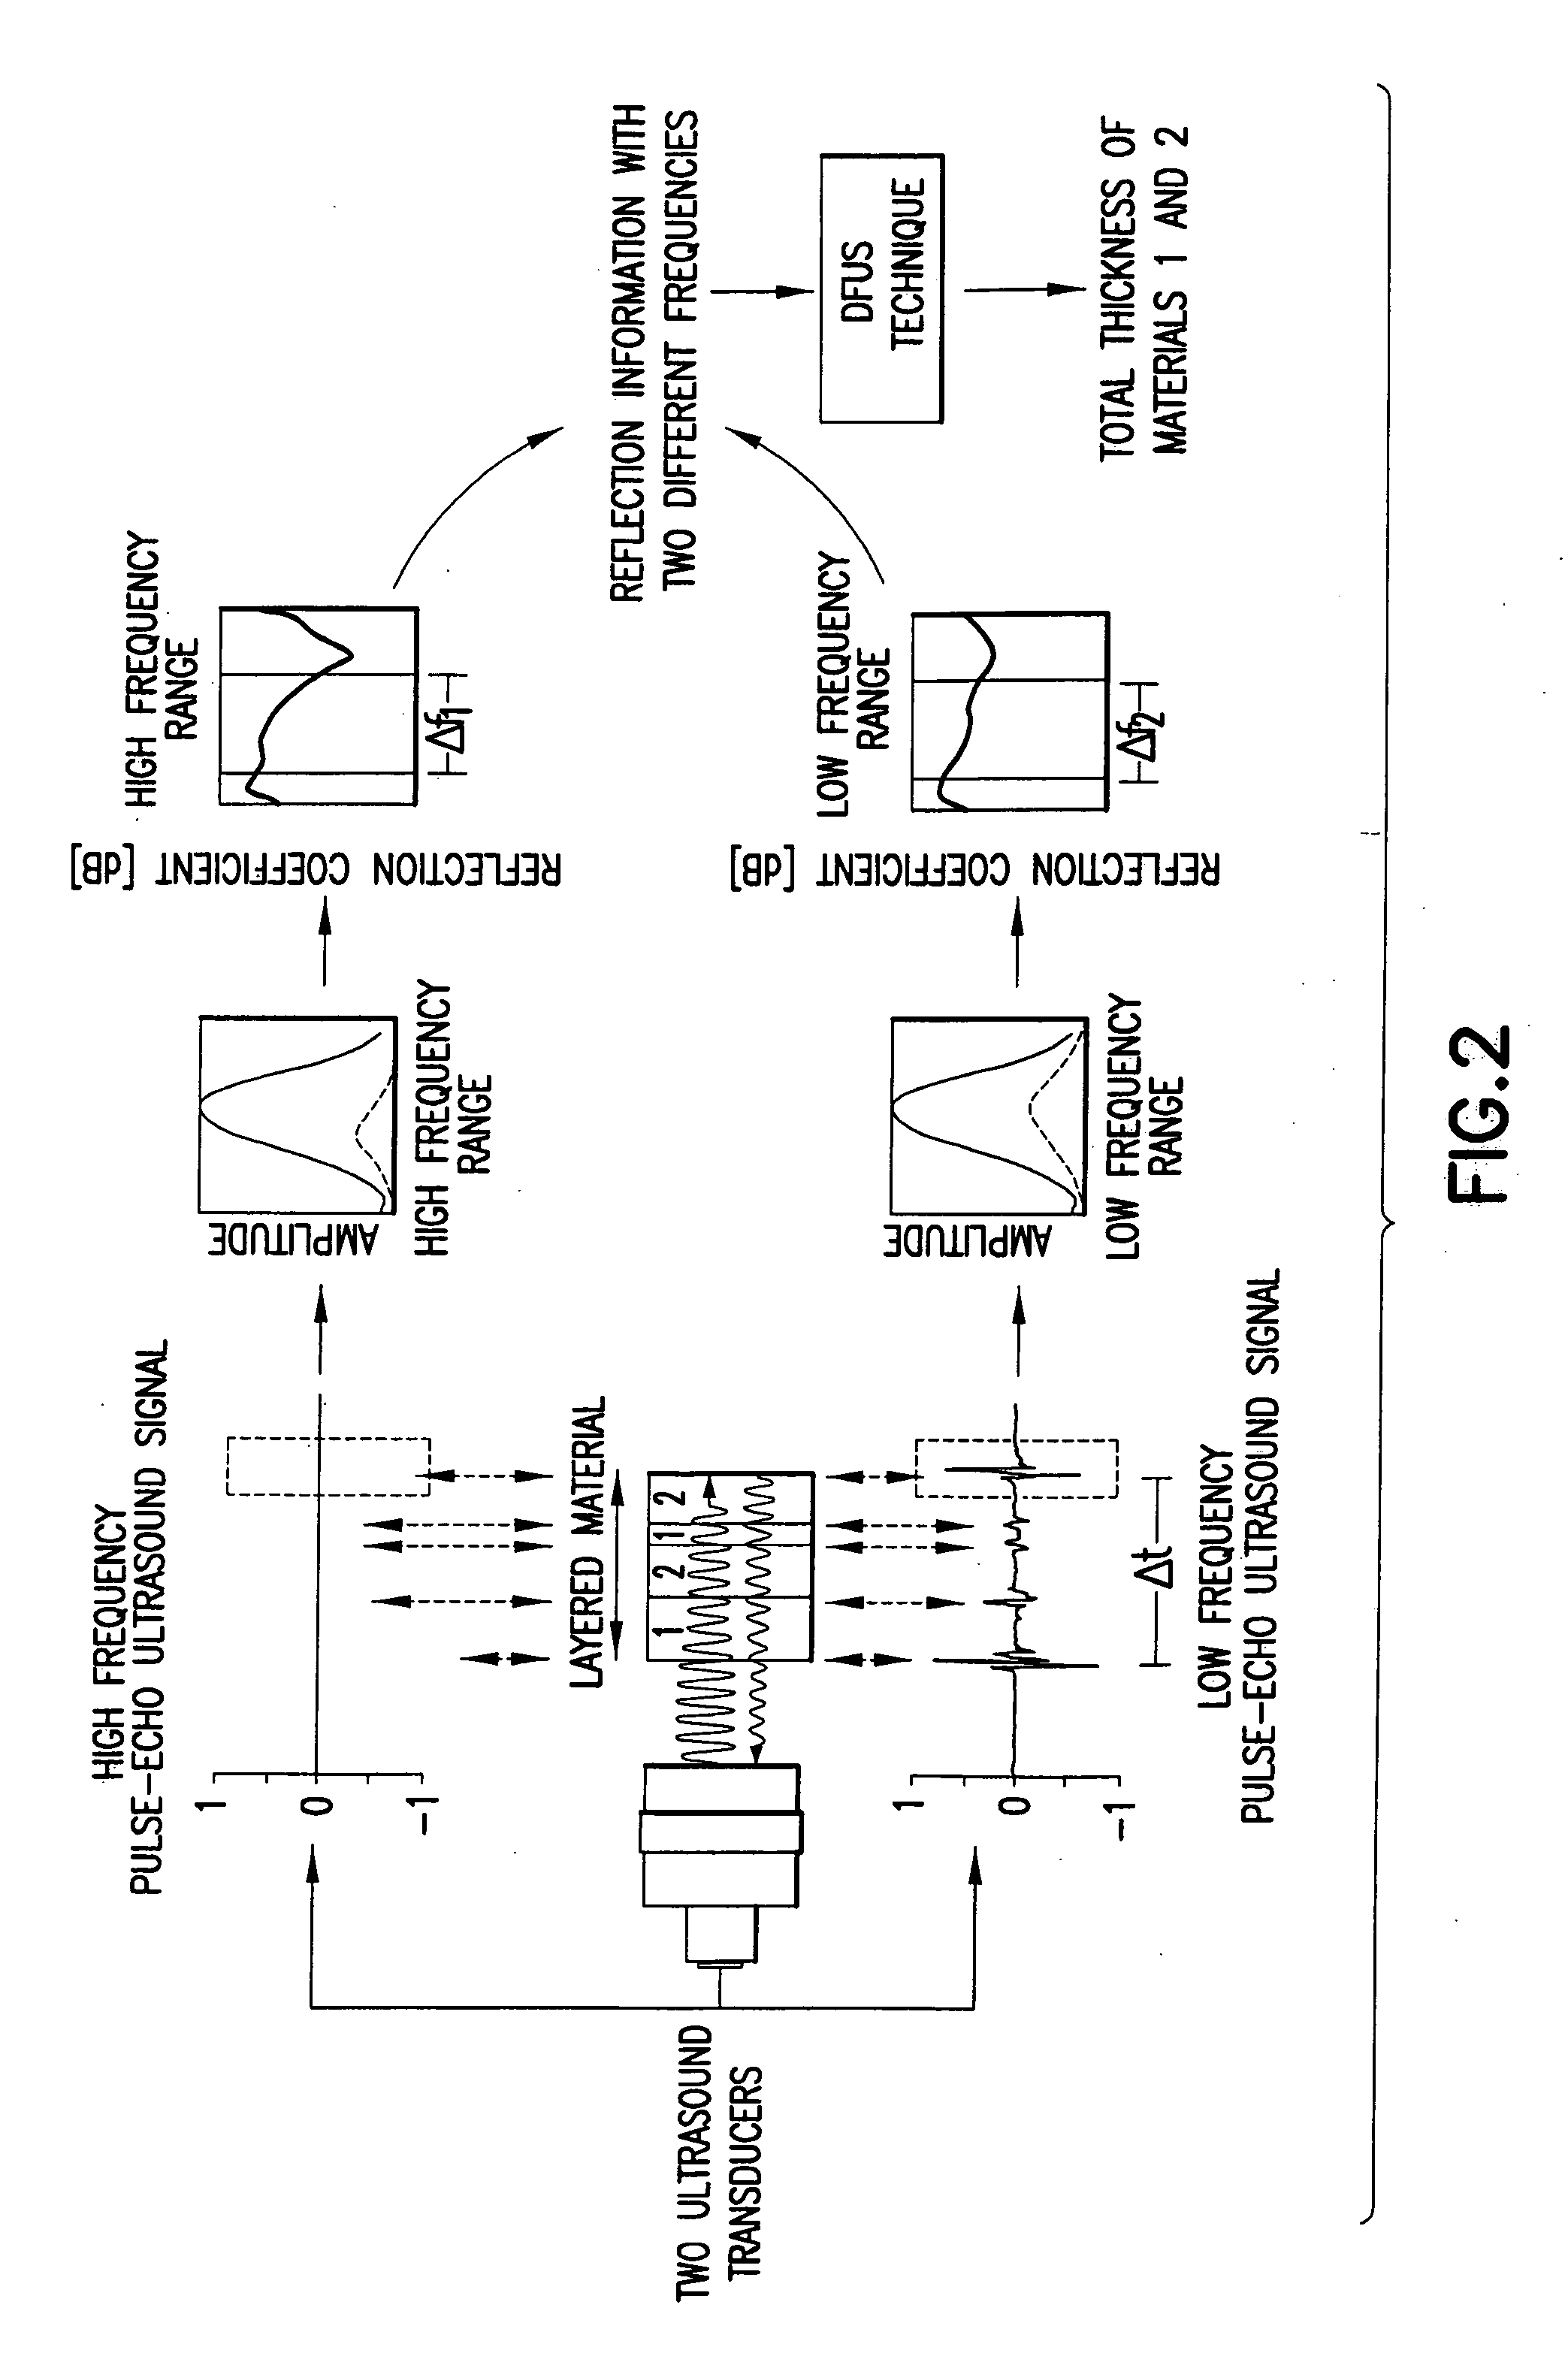 Method for measuring of thicknesses of materials using an ultrasound technique